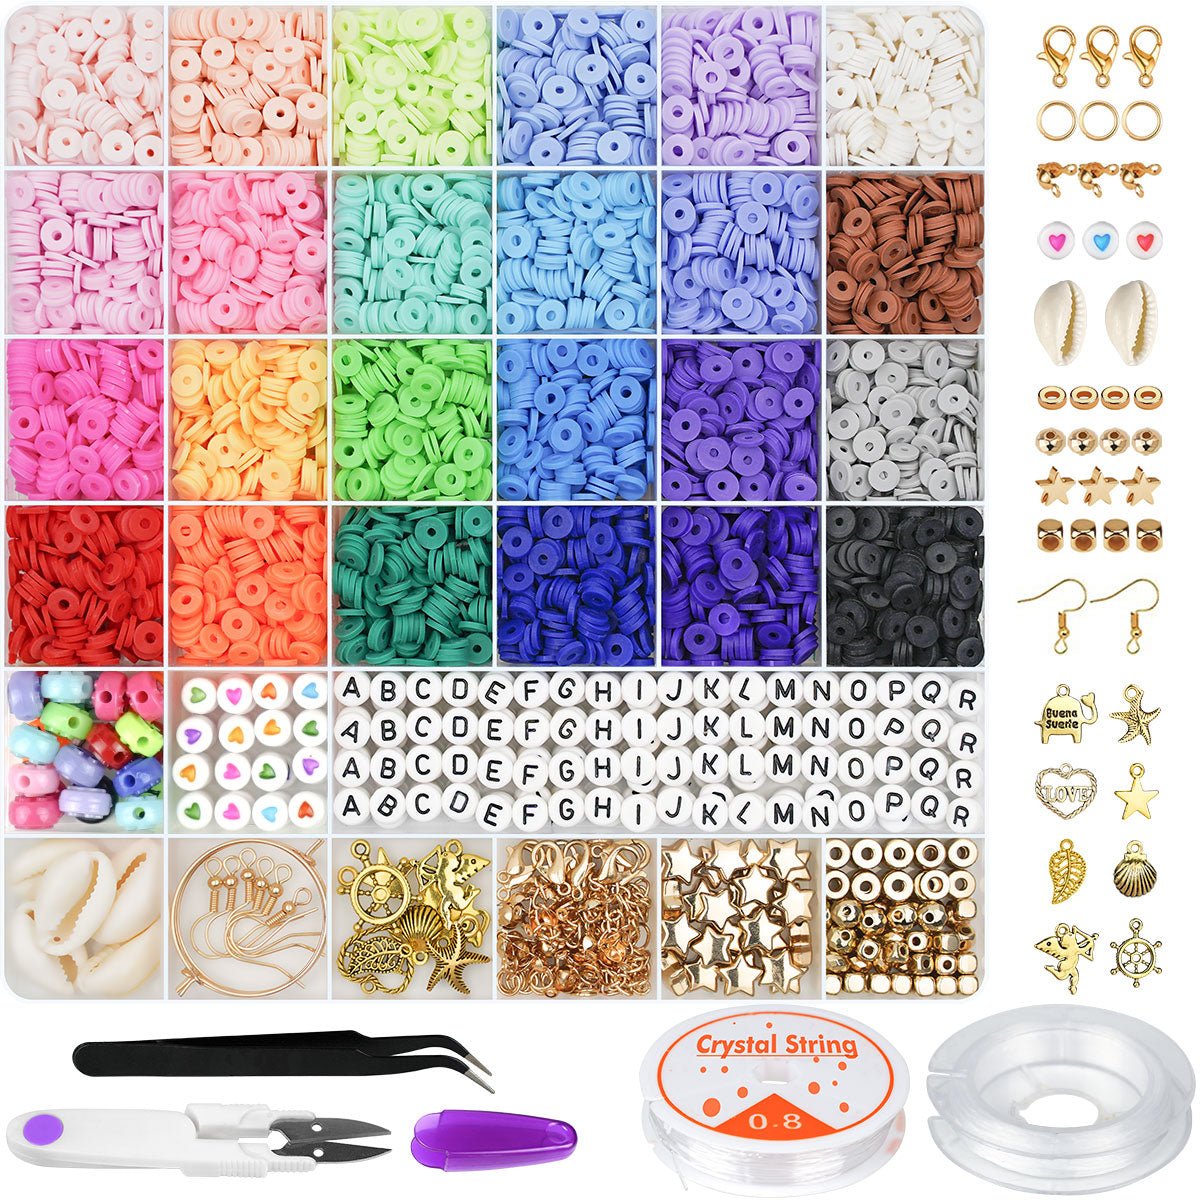 6000 Pcs Clay Beads for Bracelet Making, Gionlion 24 Colors Flat Round Polymer Clay Beads 6mm Spacer Heishi Beads with Pendant Charms Kit and Elastic Strings for Jewelry Making Kit Bracelets Necklace